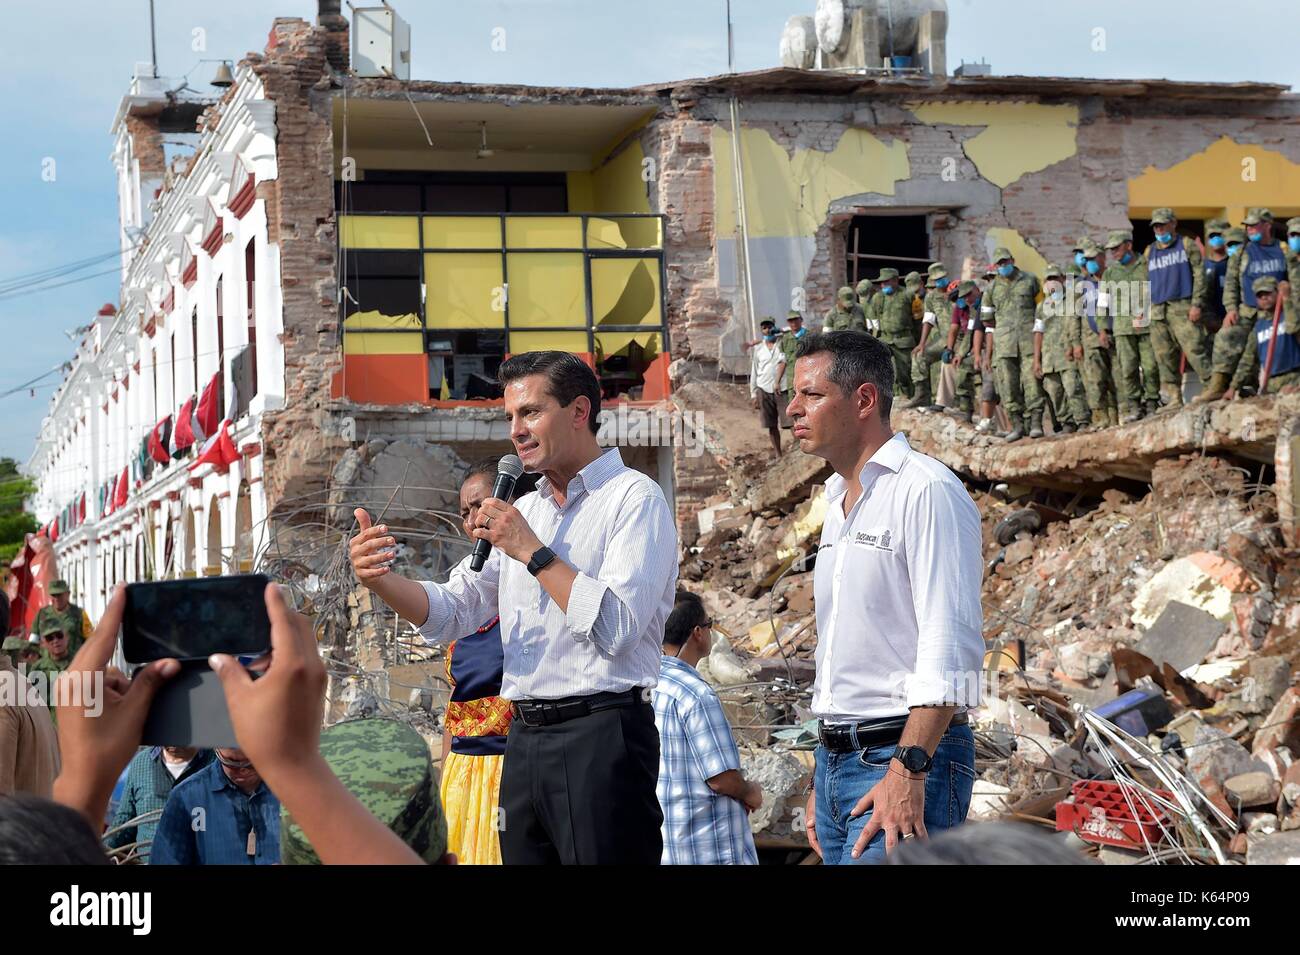 Mexican President Enrique Pena Nieto speaks to residents in front of a destroyed school as he views earthquake damage during a visit to the coastal town closest to the epicenter September 9, 2017 in Juchitán, Oaxaca, Mexico. The massive 8.2-magnitude quake struck off the southern Pacific coast of Chiapas killing at least 60 people and leveling areas in some southern states. Stock Photo